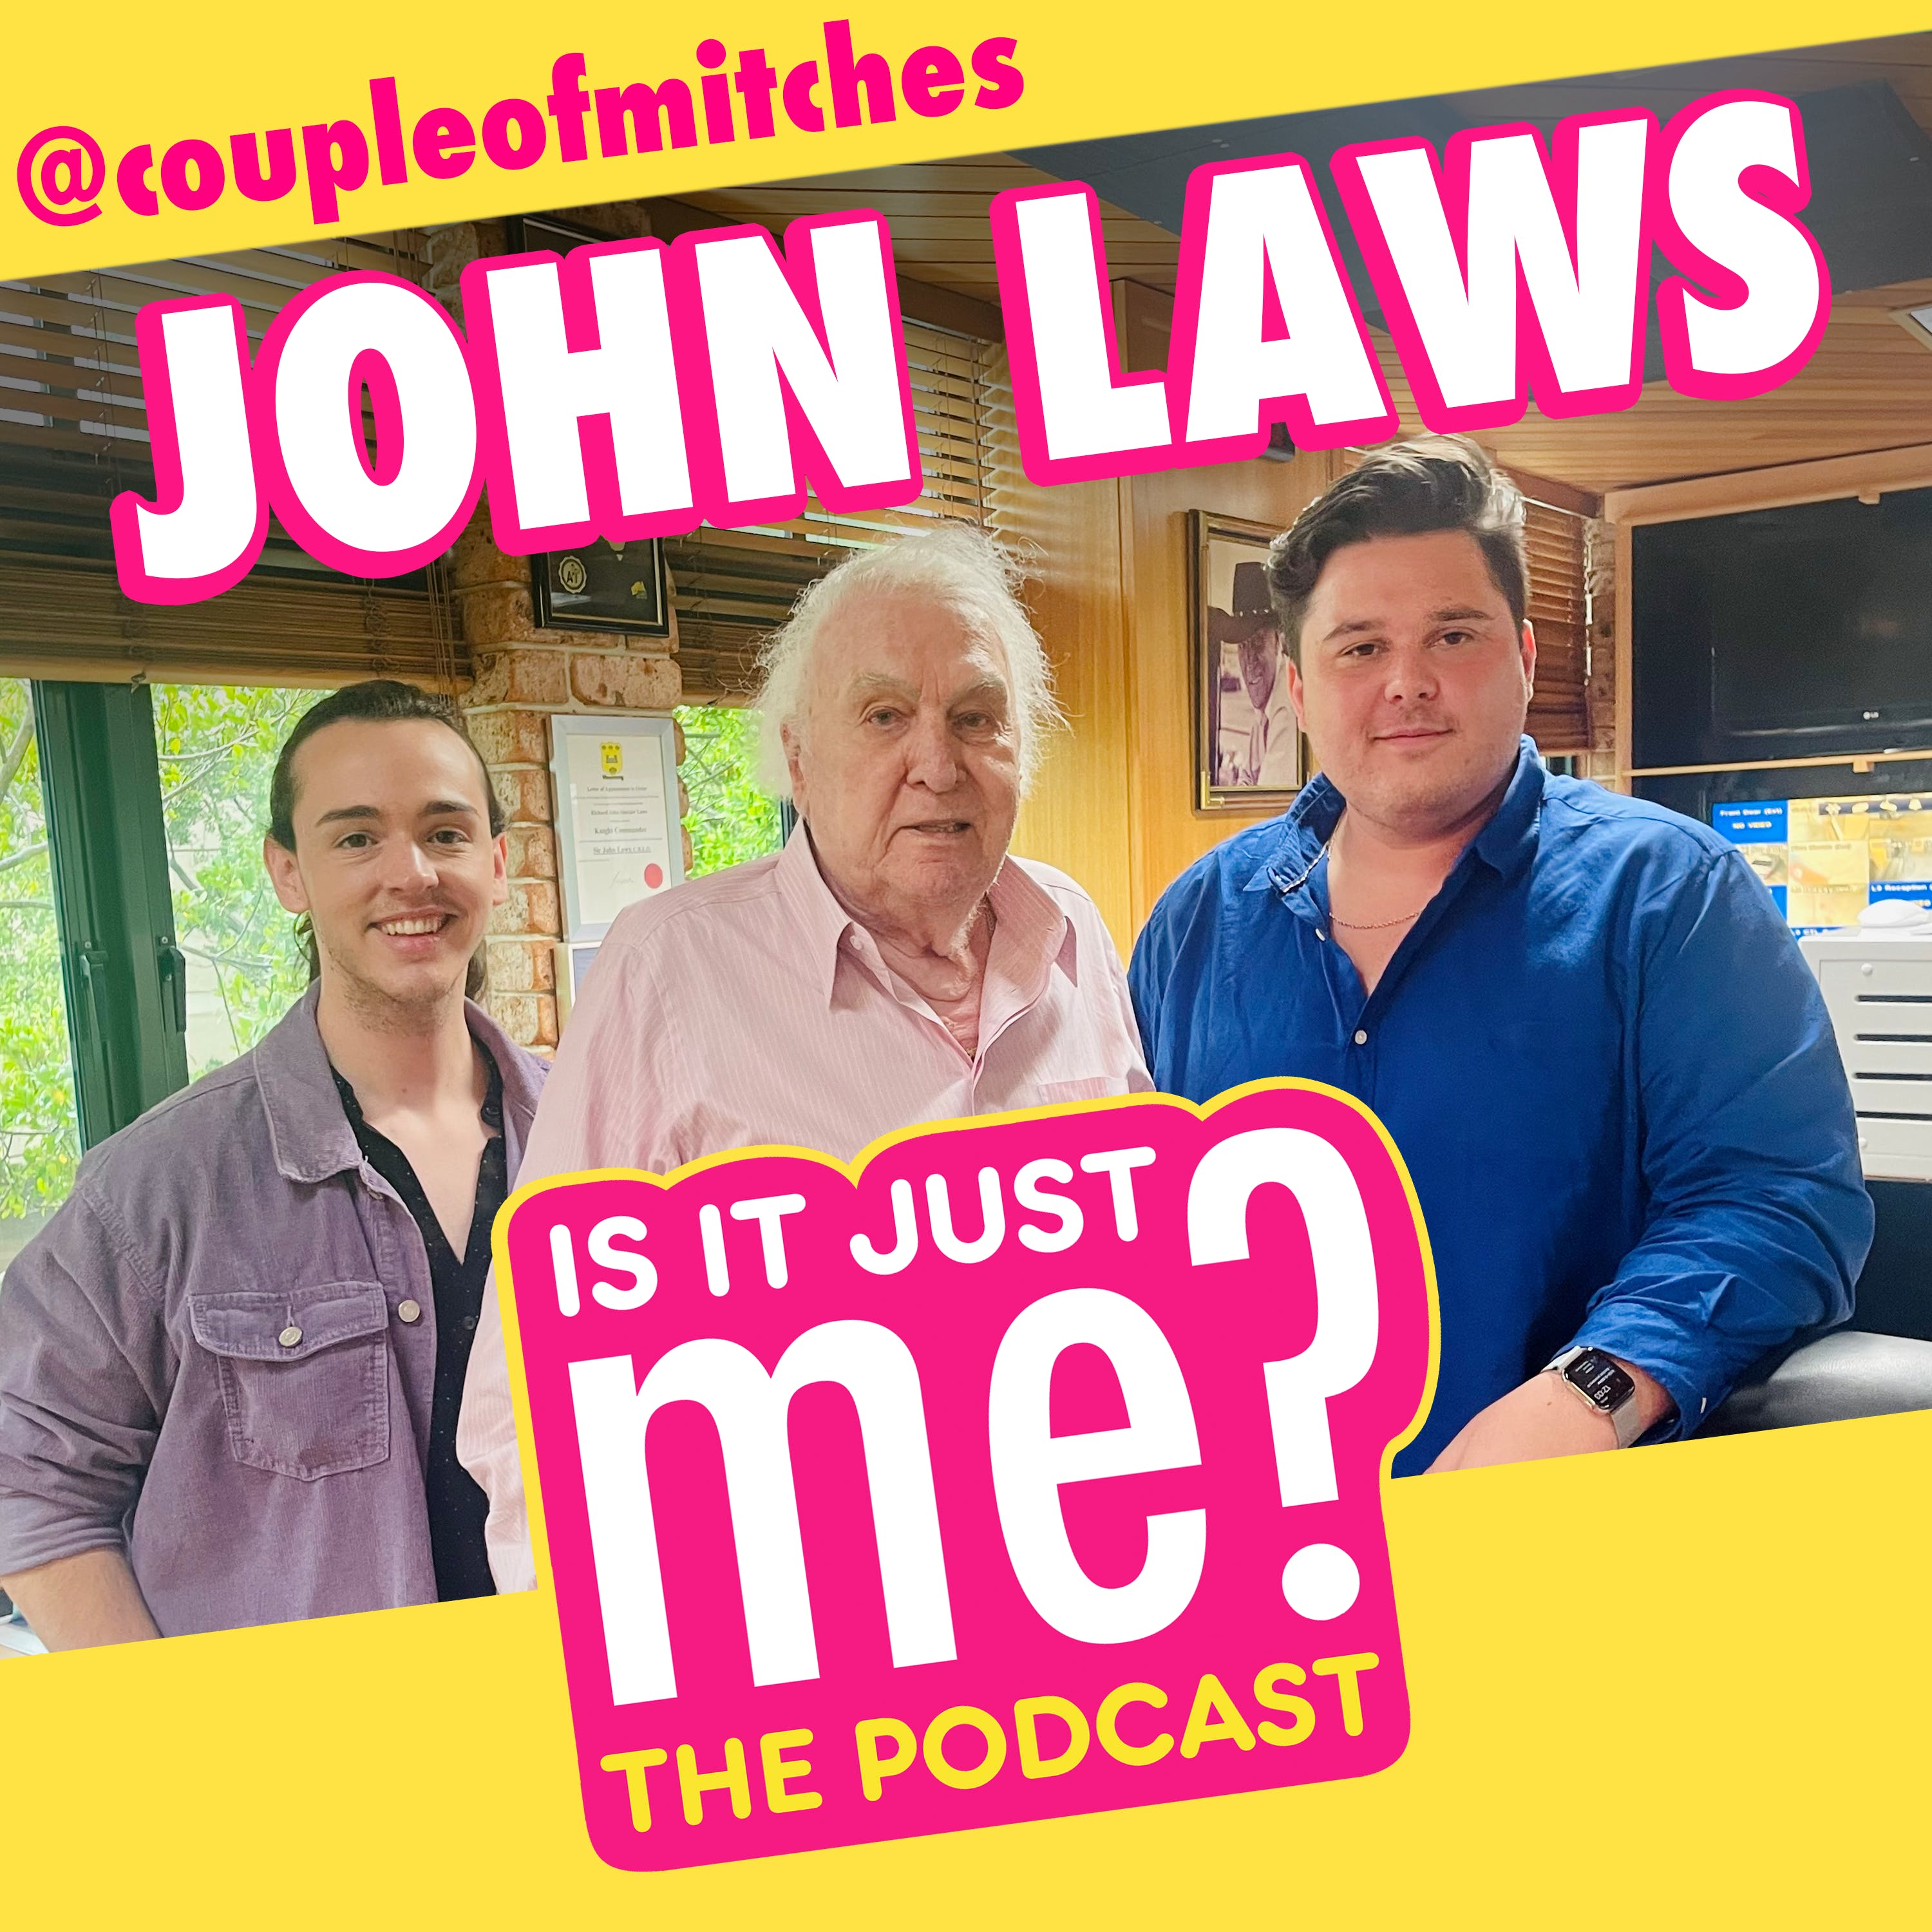 GUEST: Our John Laws Interview 📻